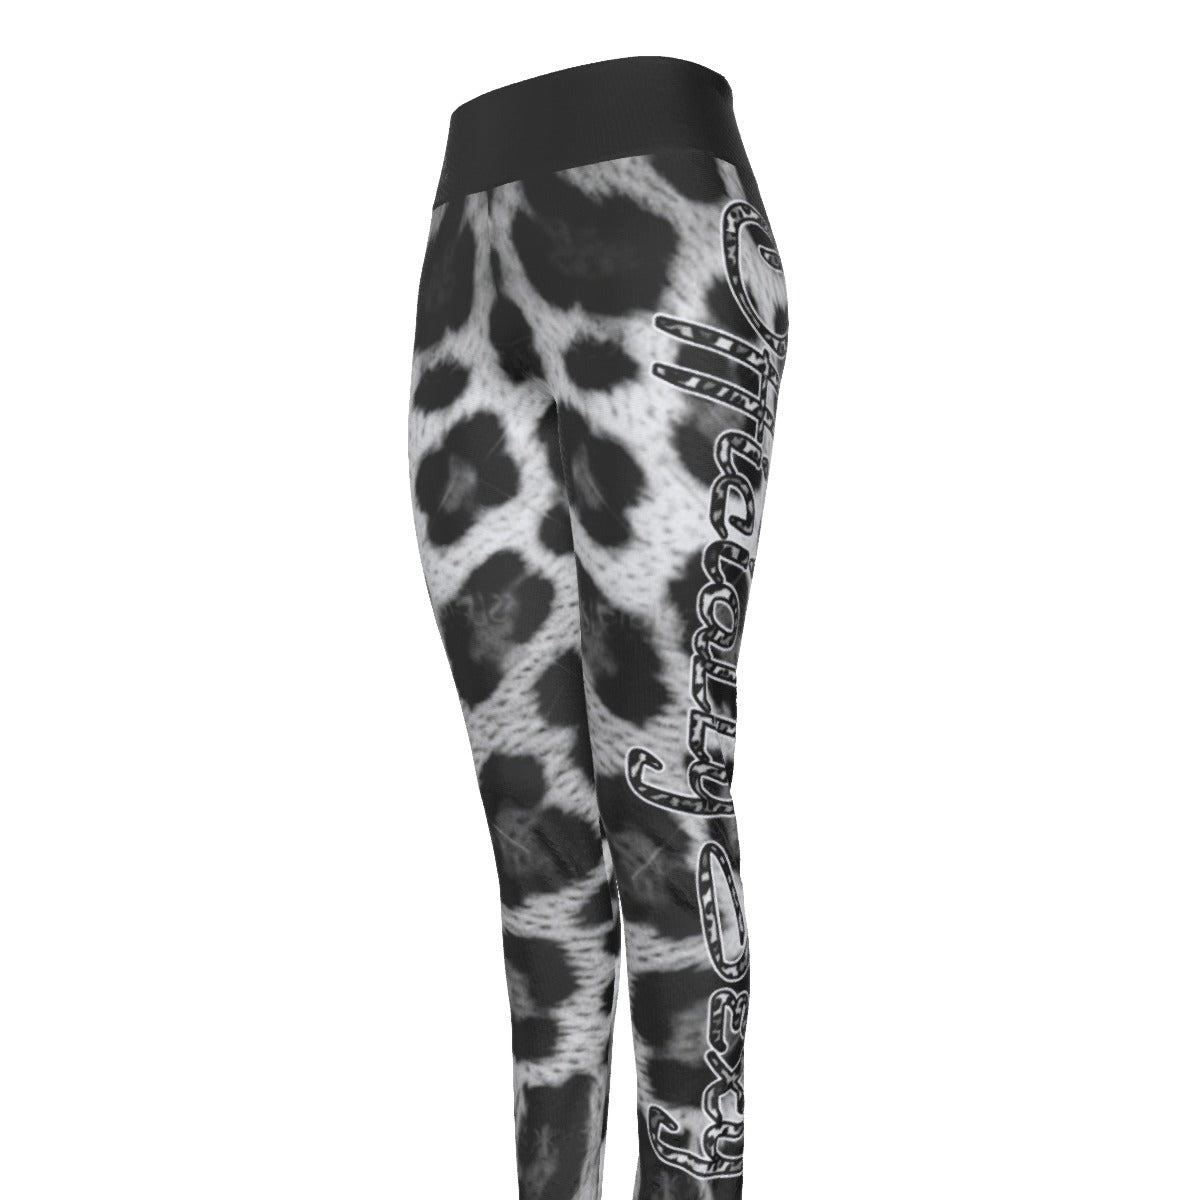 Officially Sexy Snow Leopard Print Collection Women's Black High Waist Leggings #2 (English) 4